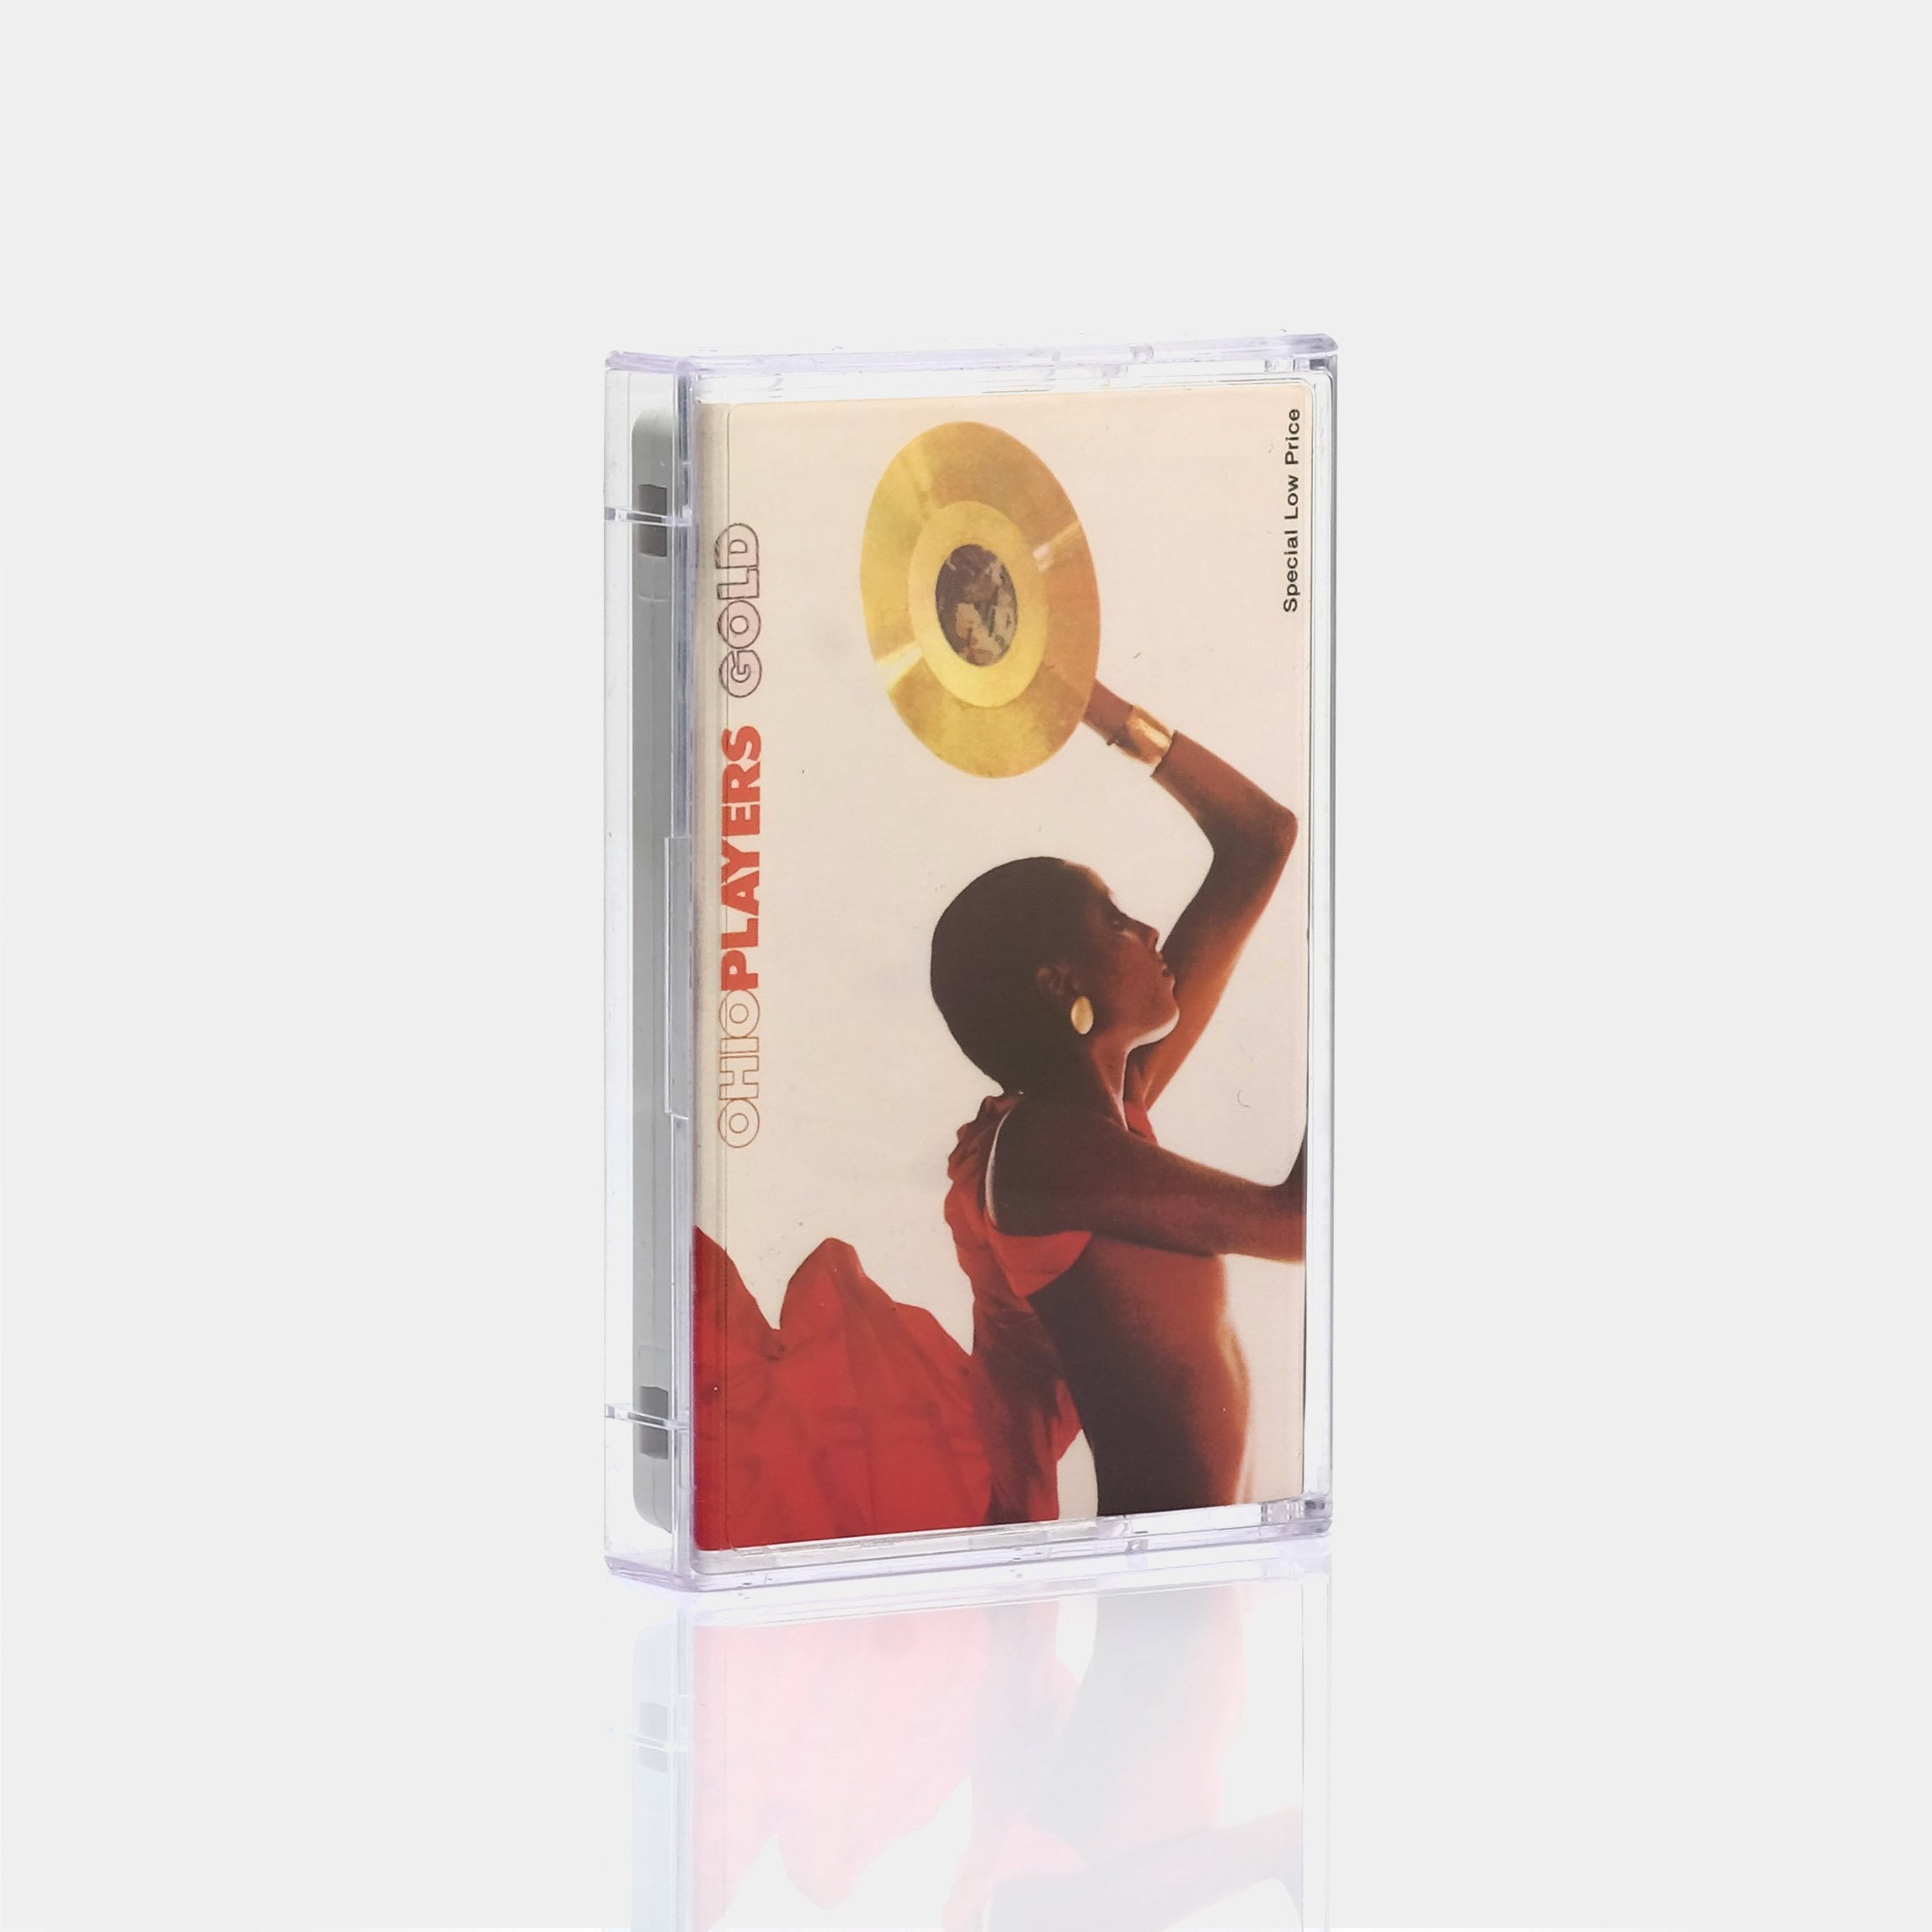 Ohio Players - Gold Cassette Tape